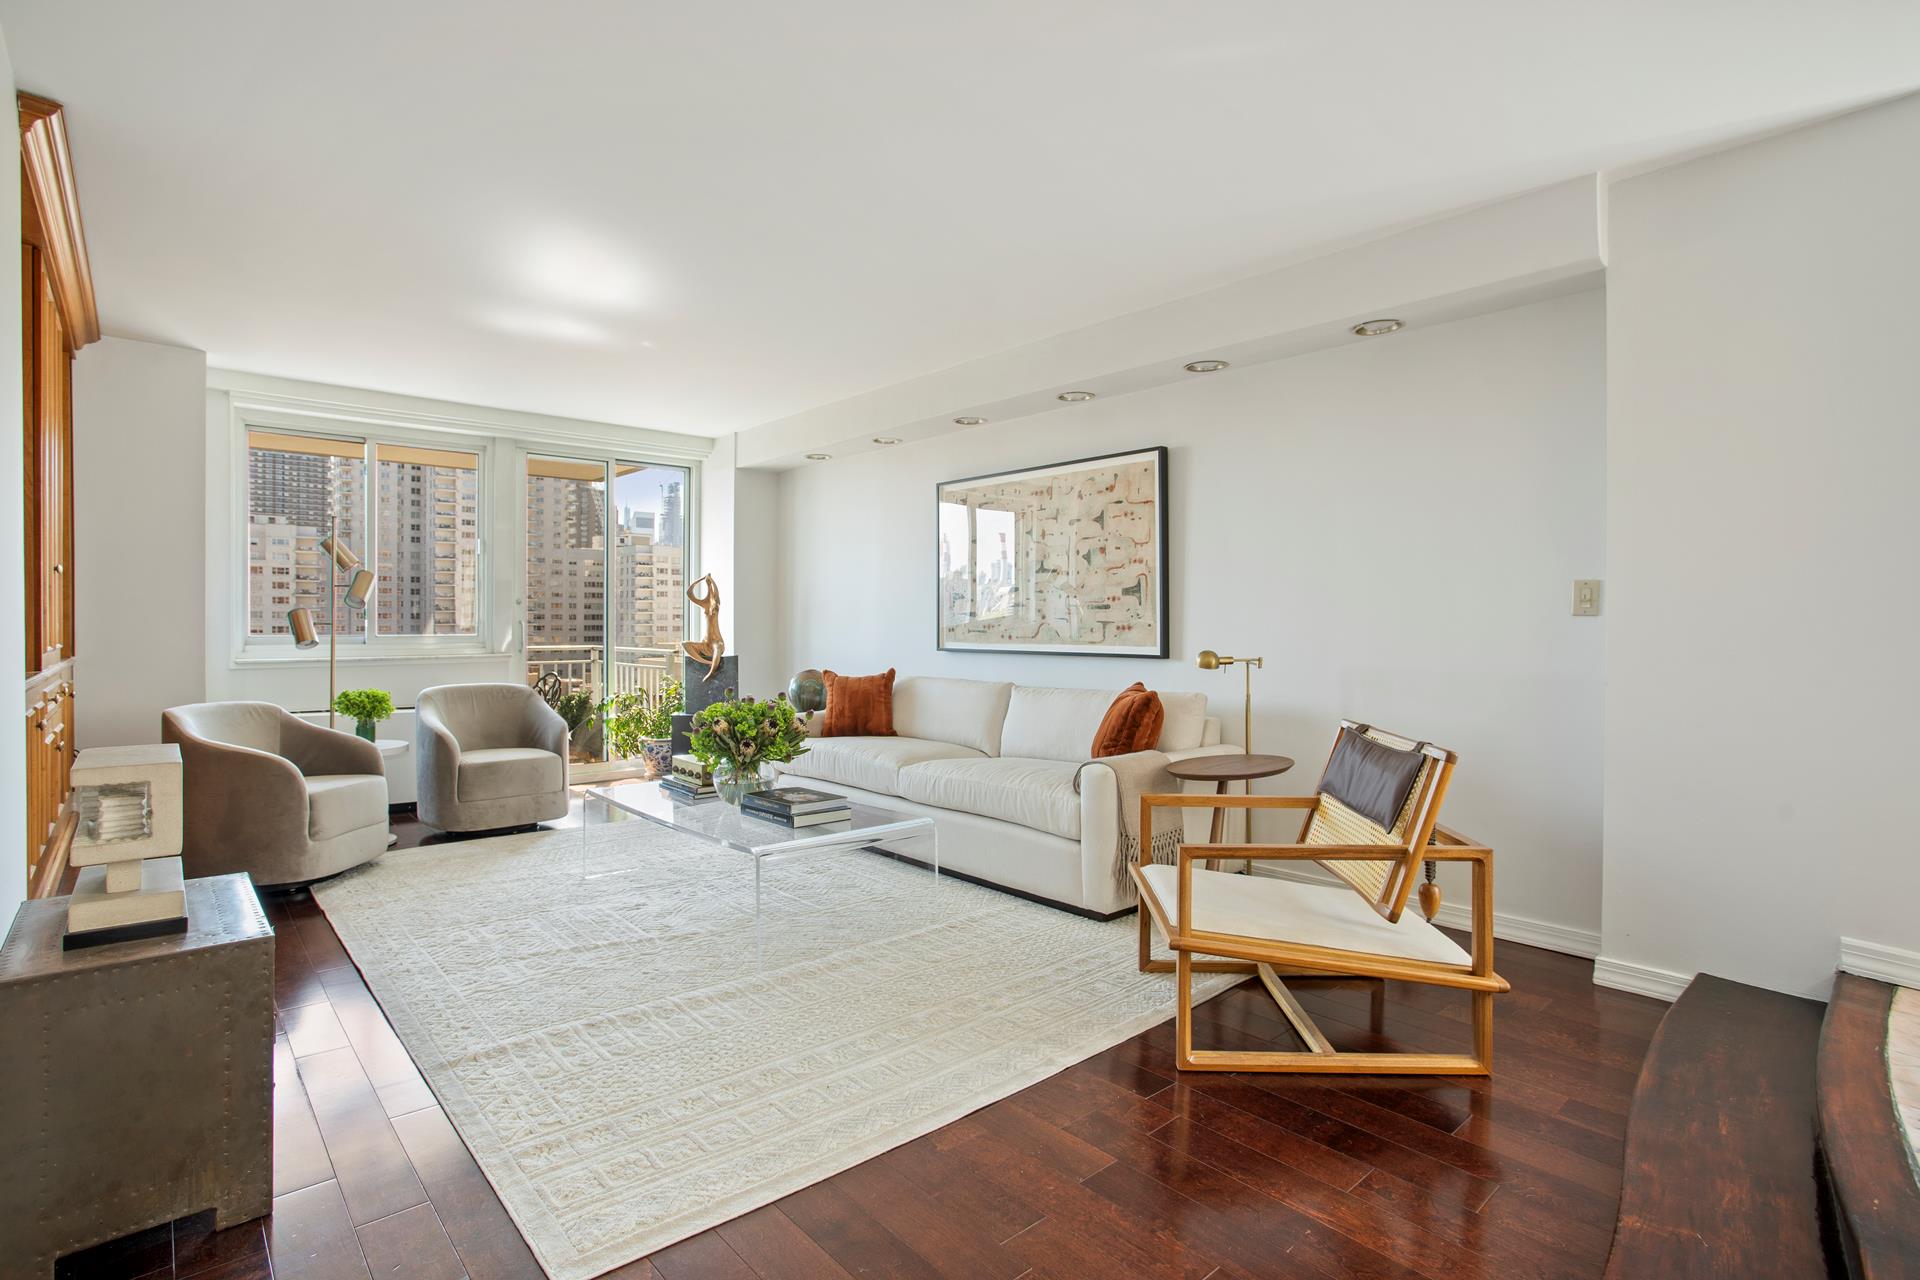 515 East 79th Street 14Bc, Yorkville, Upper East Side, NYC - 3 Bedrooms  
4.5 Bathrooms  
7 Rooms - 